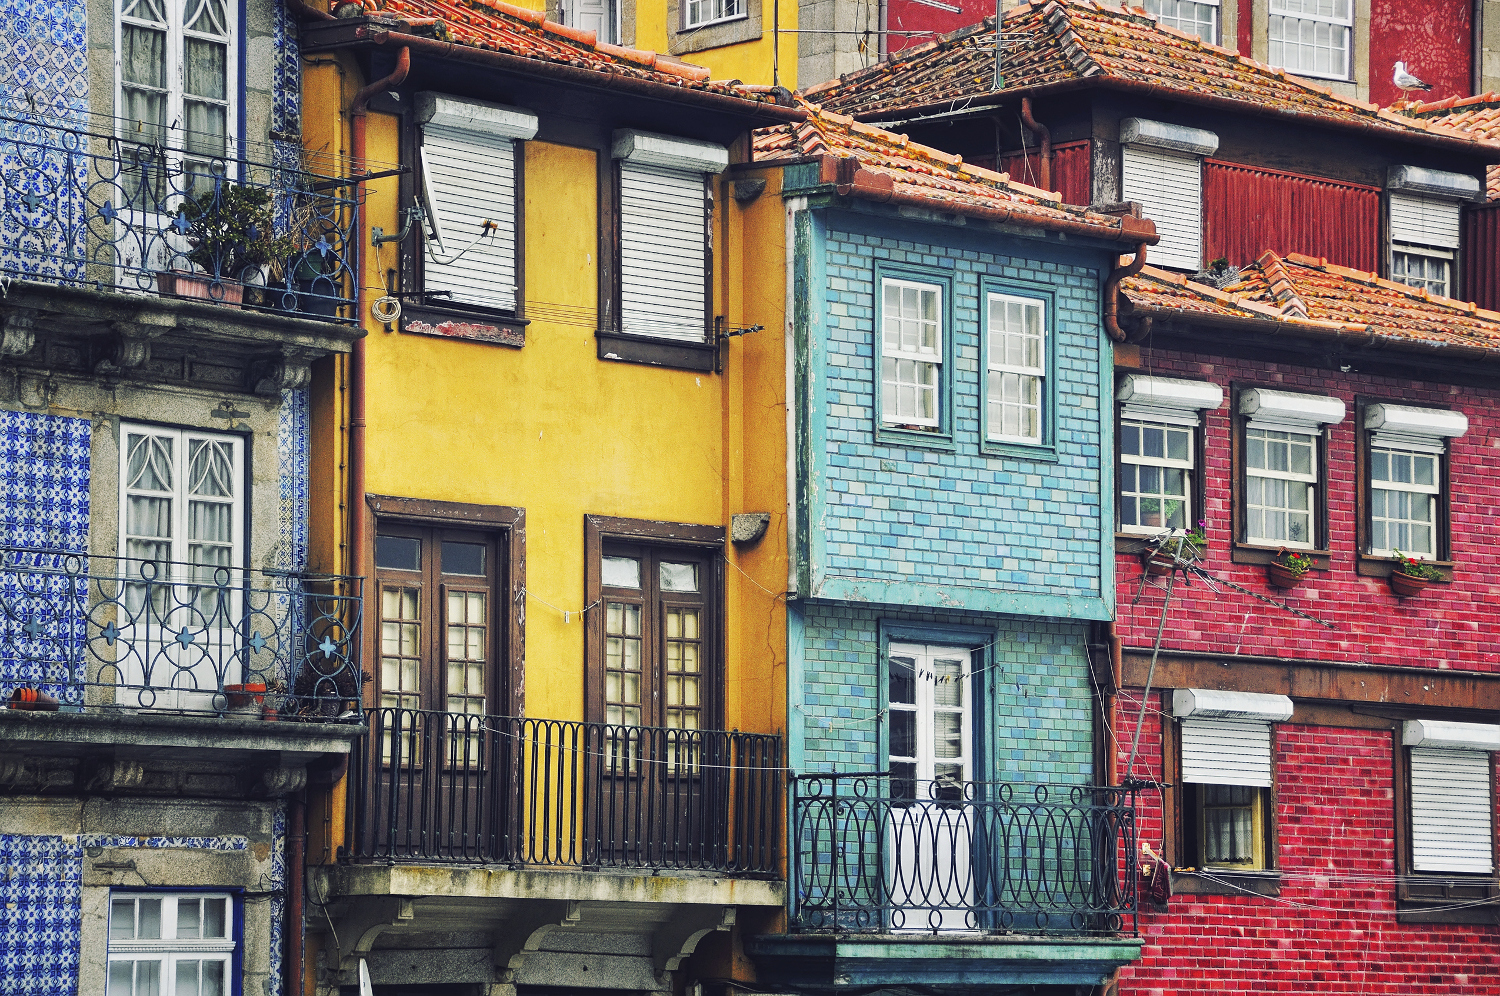 Head to alley-woven Ribeira for a wander before dinner. Image by MadrugadaVerde / iStock / Getty